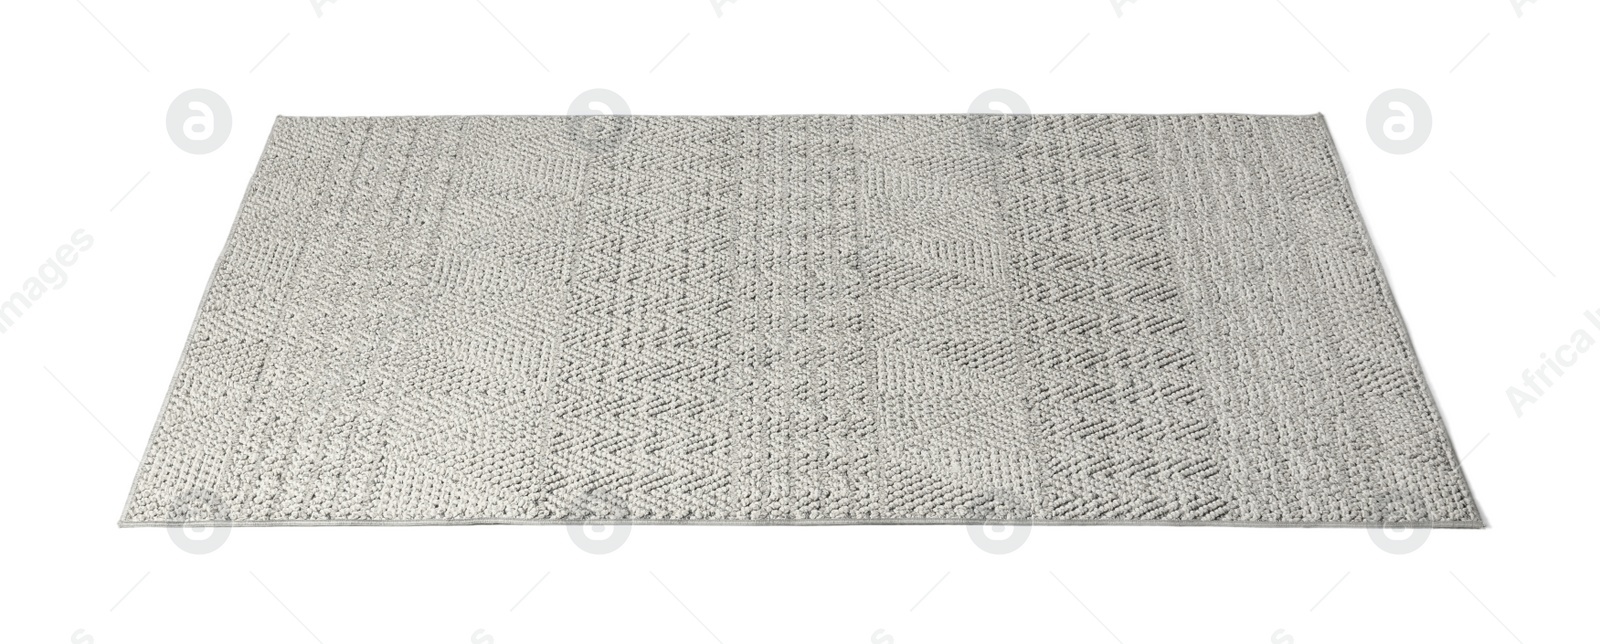 Photo of Grey carpet with geometric pattern isolated on white